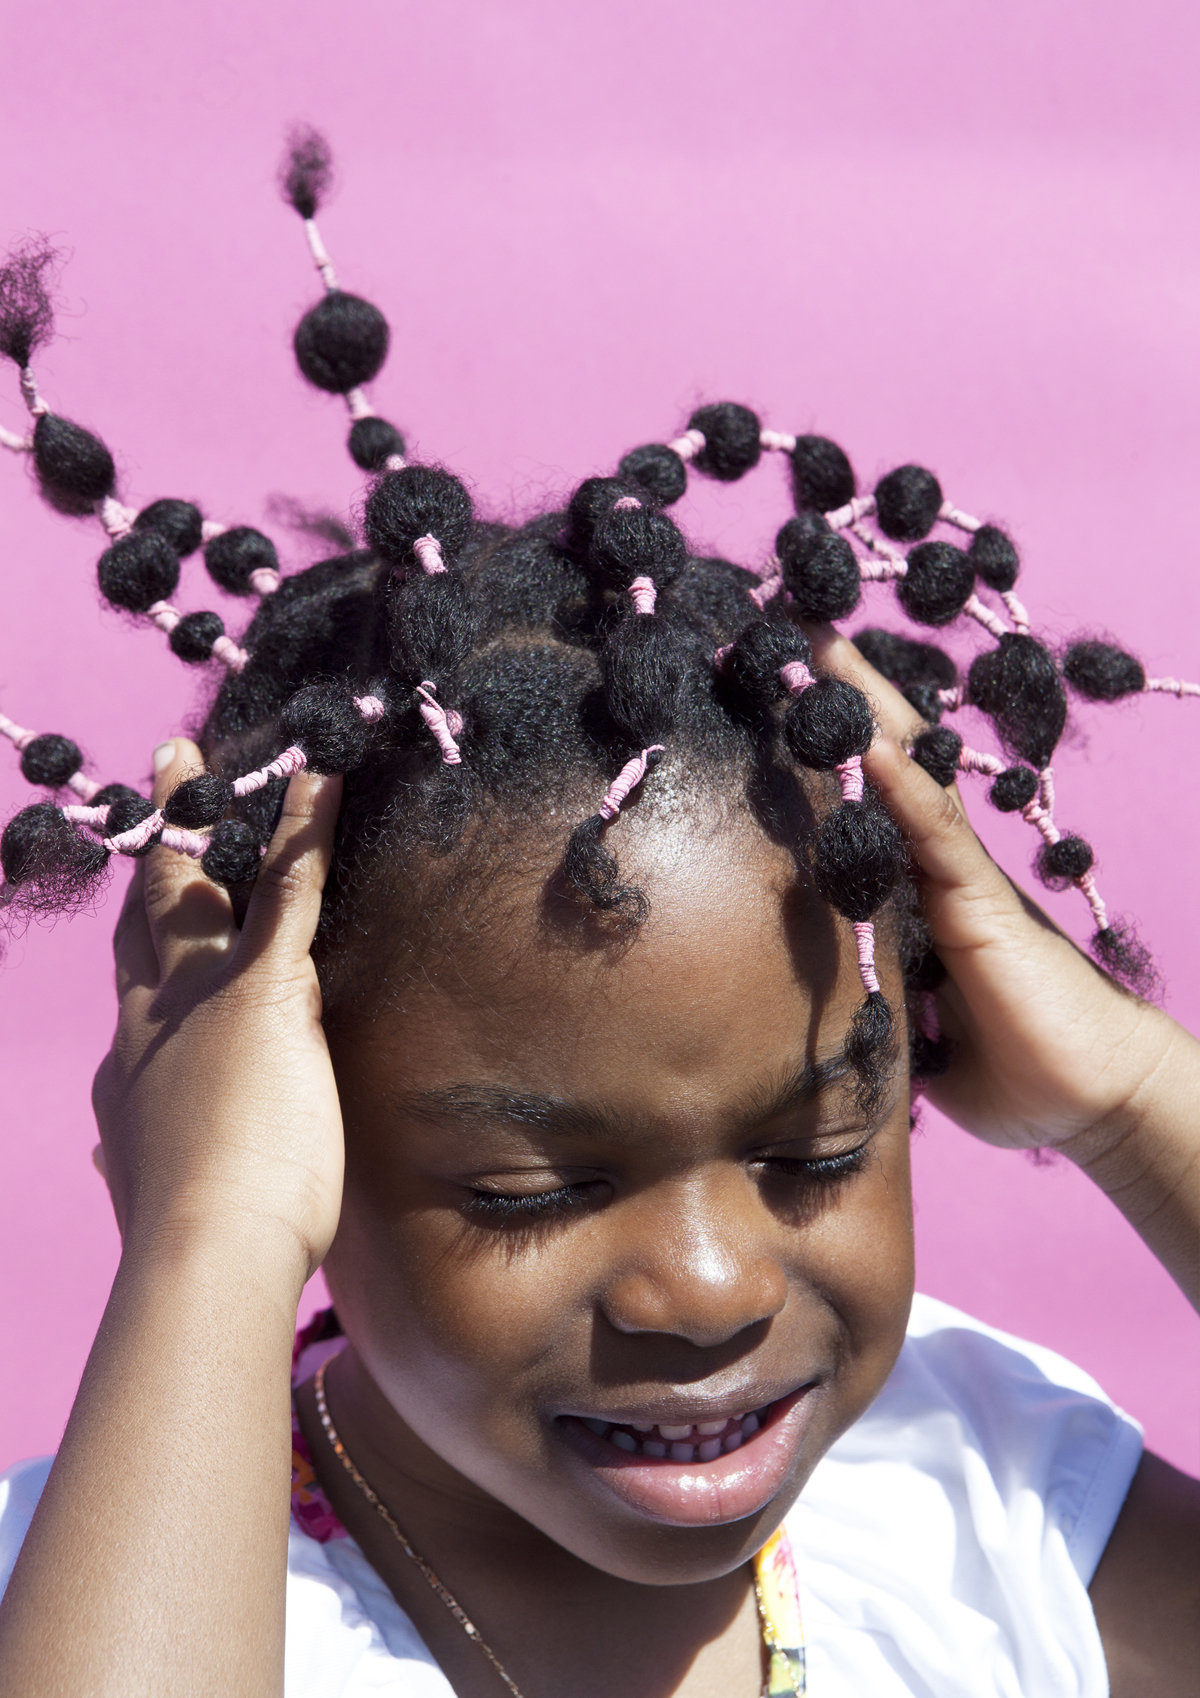 11 Carefree Kids Show The Beauty And Joy Of Black Hair | HuffPost Voices